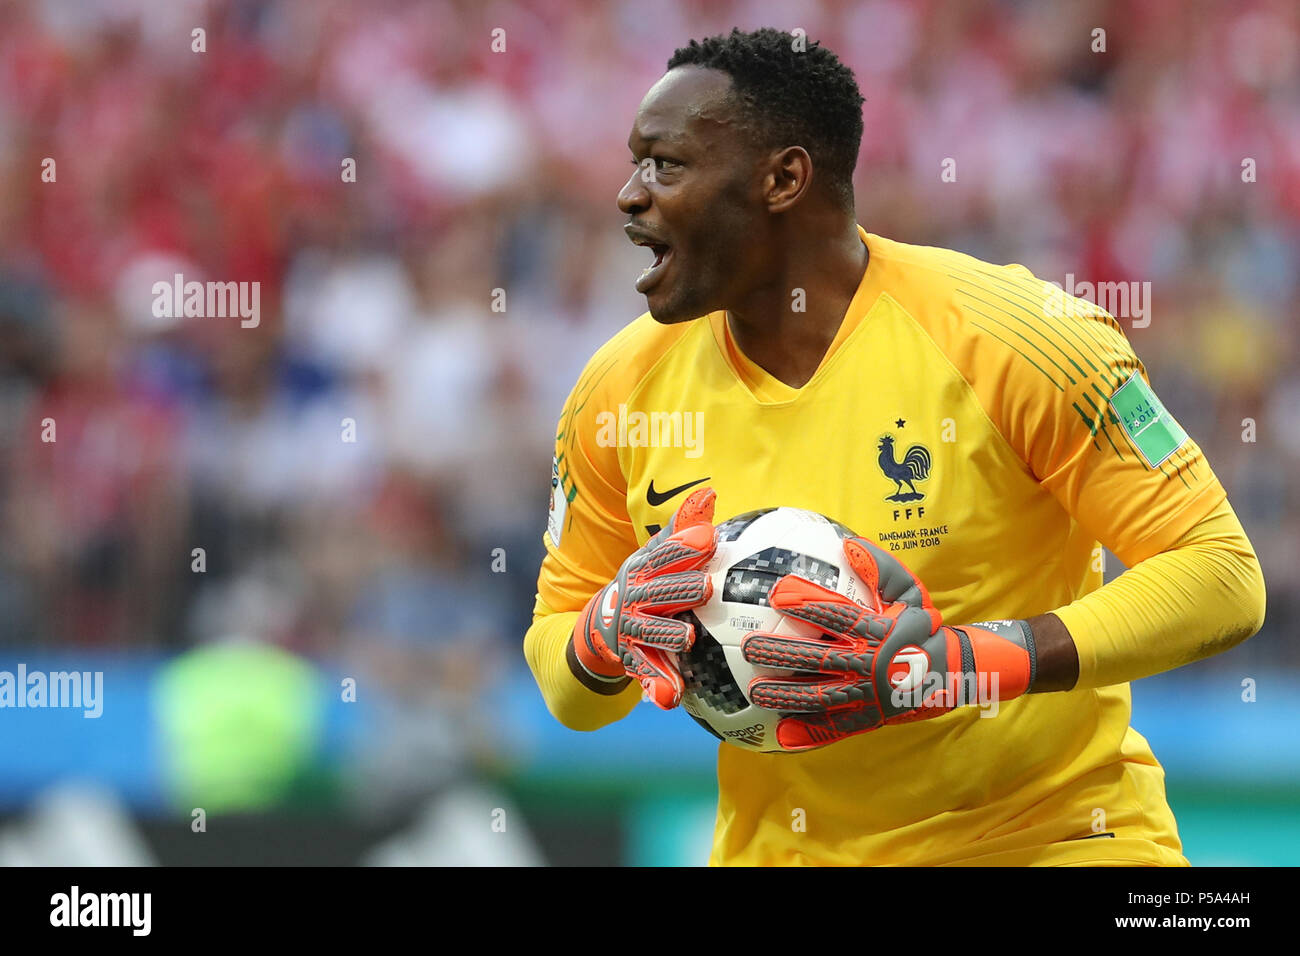 Moscow, Russia. 26th Jun, 2018. Steve Mandanda during the match between Denmark and France valid for the 2018 World Cup held held at the Lujniki Stadium in Moscow, Russia. (Photo: Ricardo Moreira/Fotoarena) Credit: Foto Arena LTDA/Alamy Live News Stock Photo